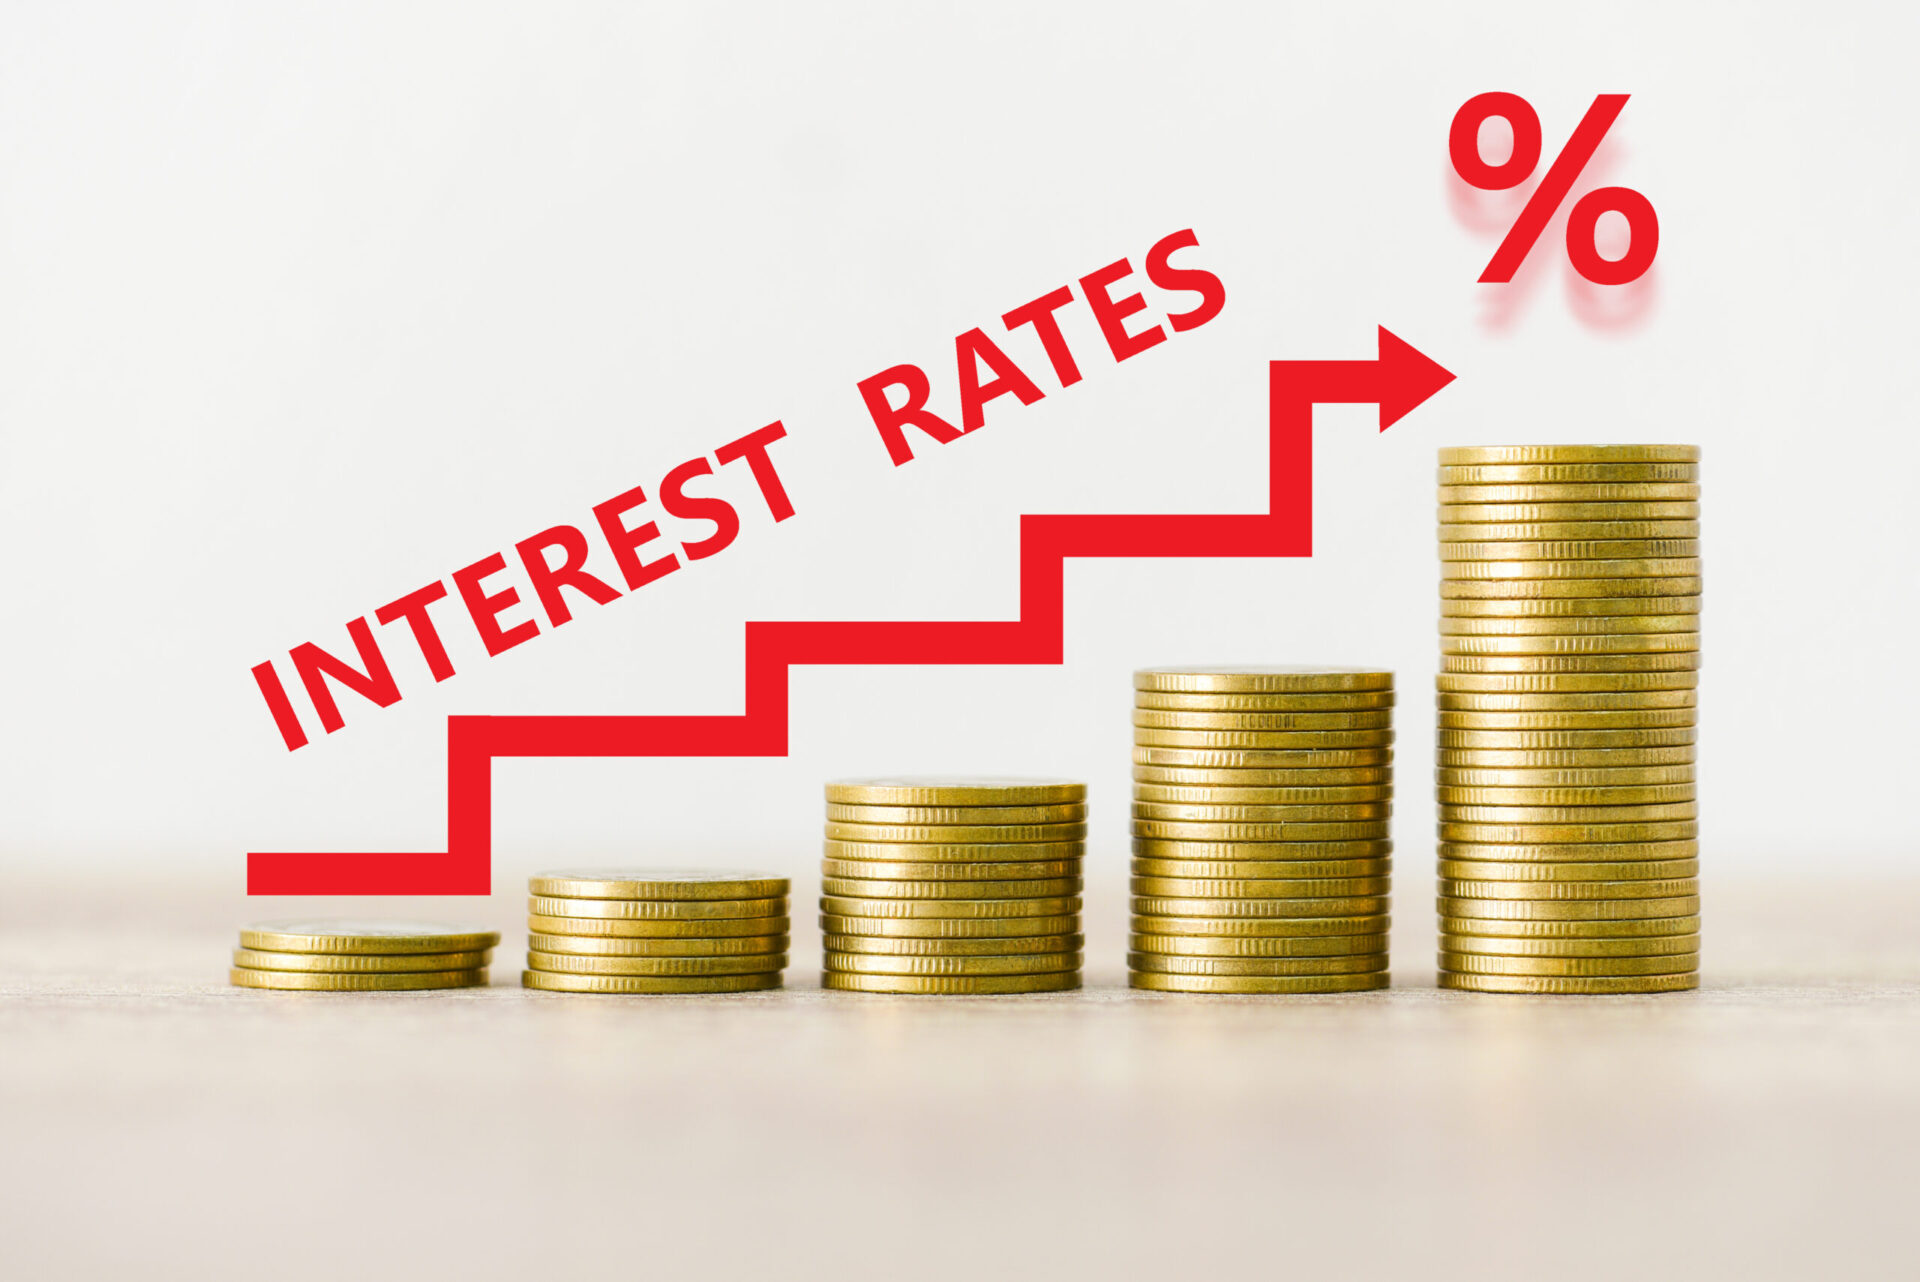 Economist: Interest Rates Will Go Up in 2022, Rise Even More in 2023